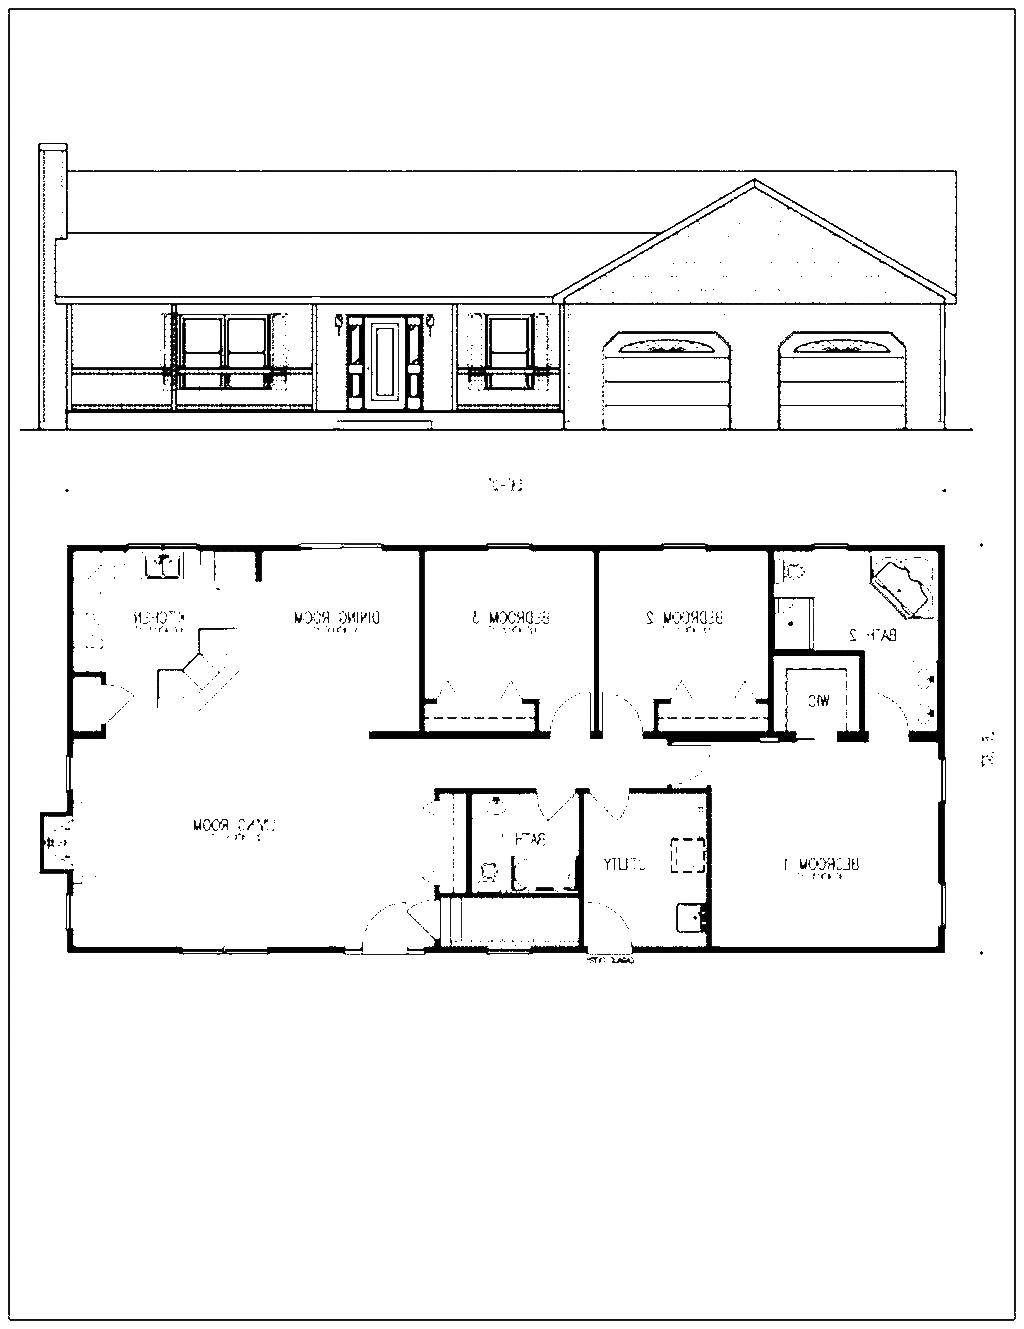 Coloring The scheme of a private house. Category Bedroom. Tags:  diagram, house.